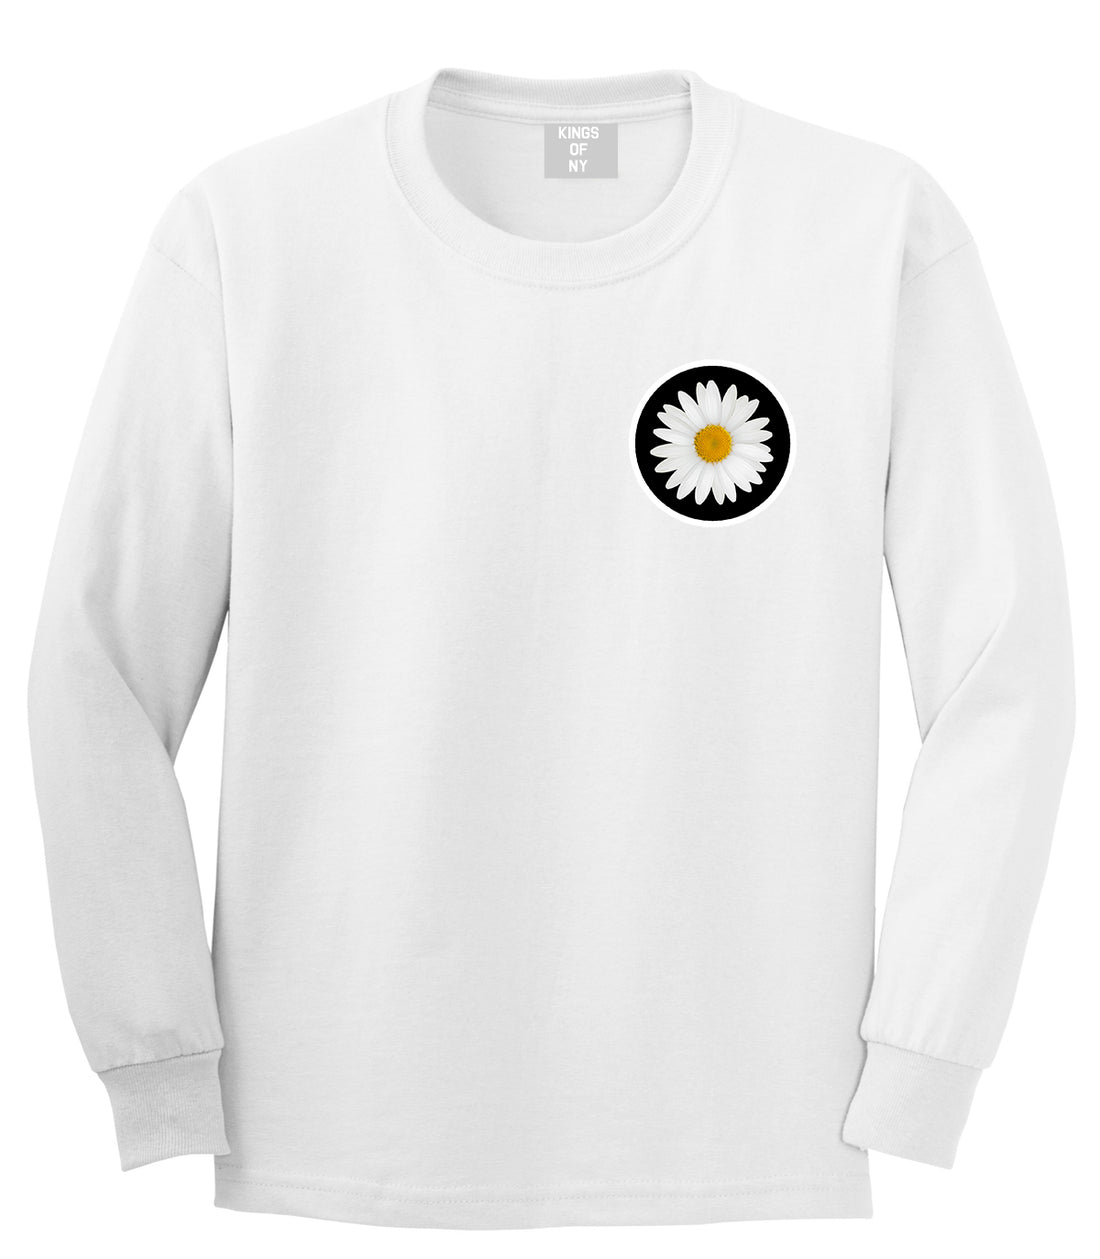 Daisy Flower Chest Mens White Long Sleeve T-Shirt by Kings Of NY